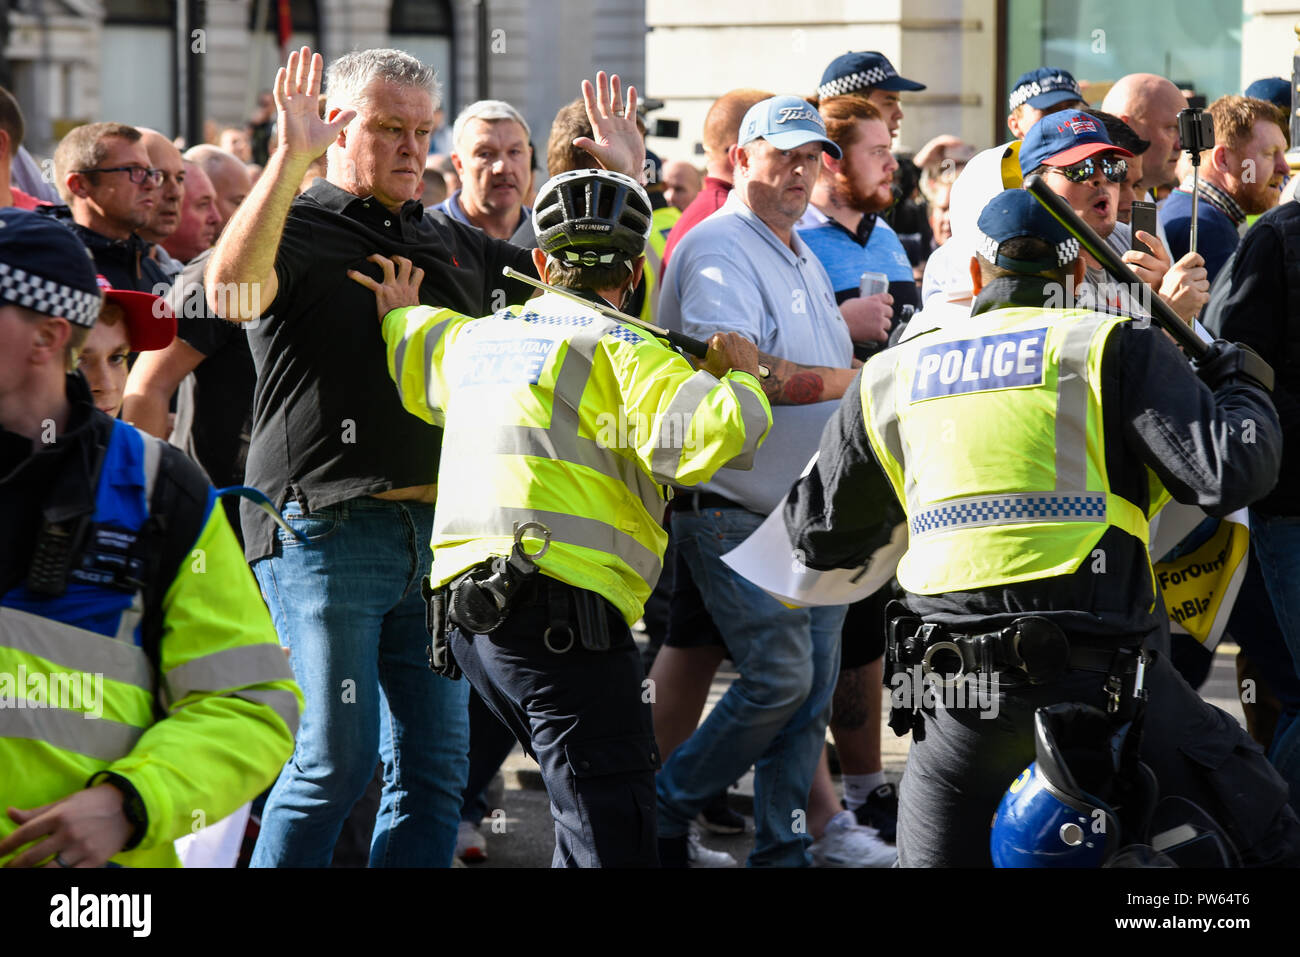 Democratic Football Lads Alliance DFLA marching towards Parliament, London, in protest demonstration. Marchers broke through a police cordon and scuffles took place. Cycle officer with telescopic baton stick Stock Photo